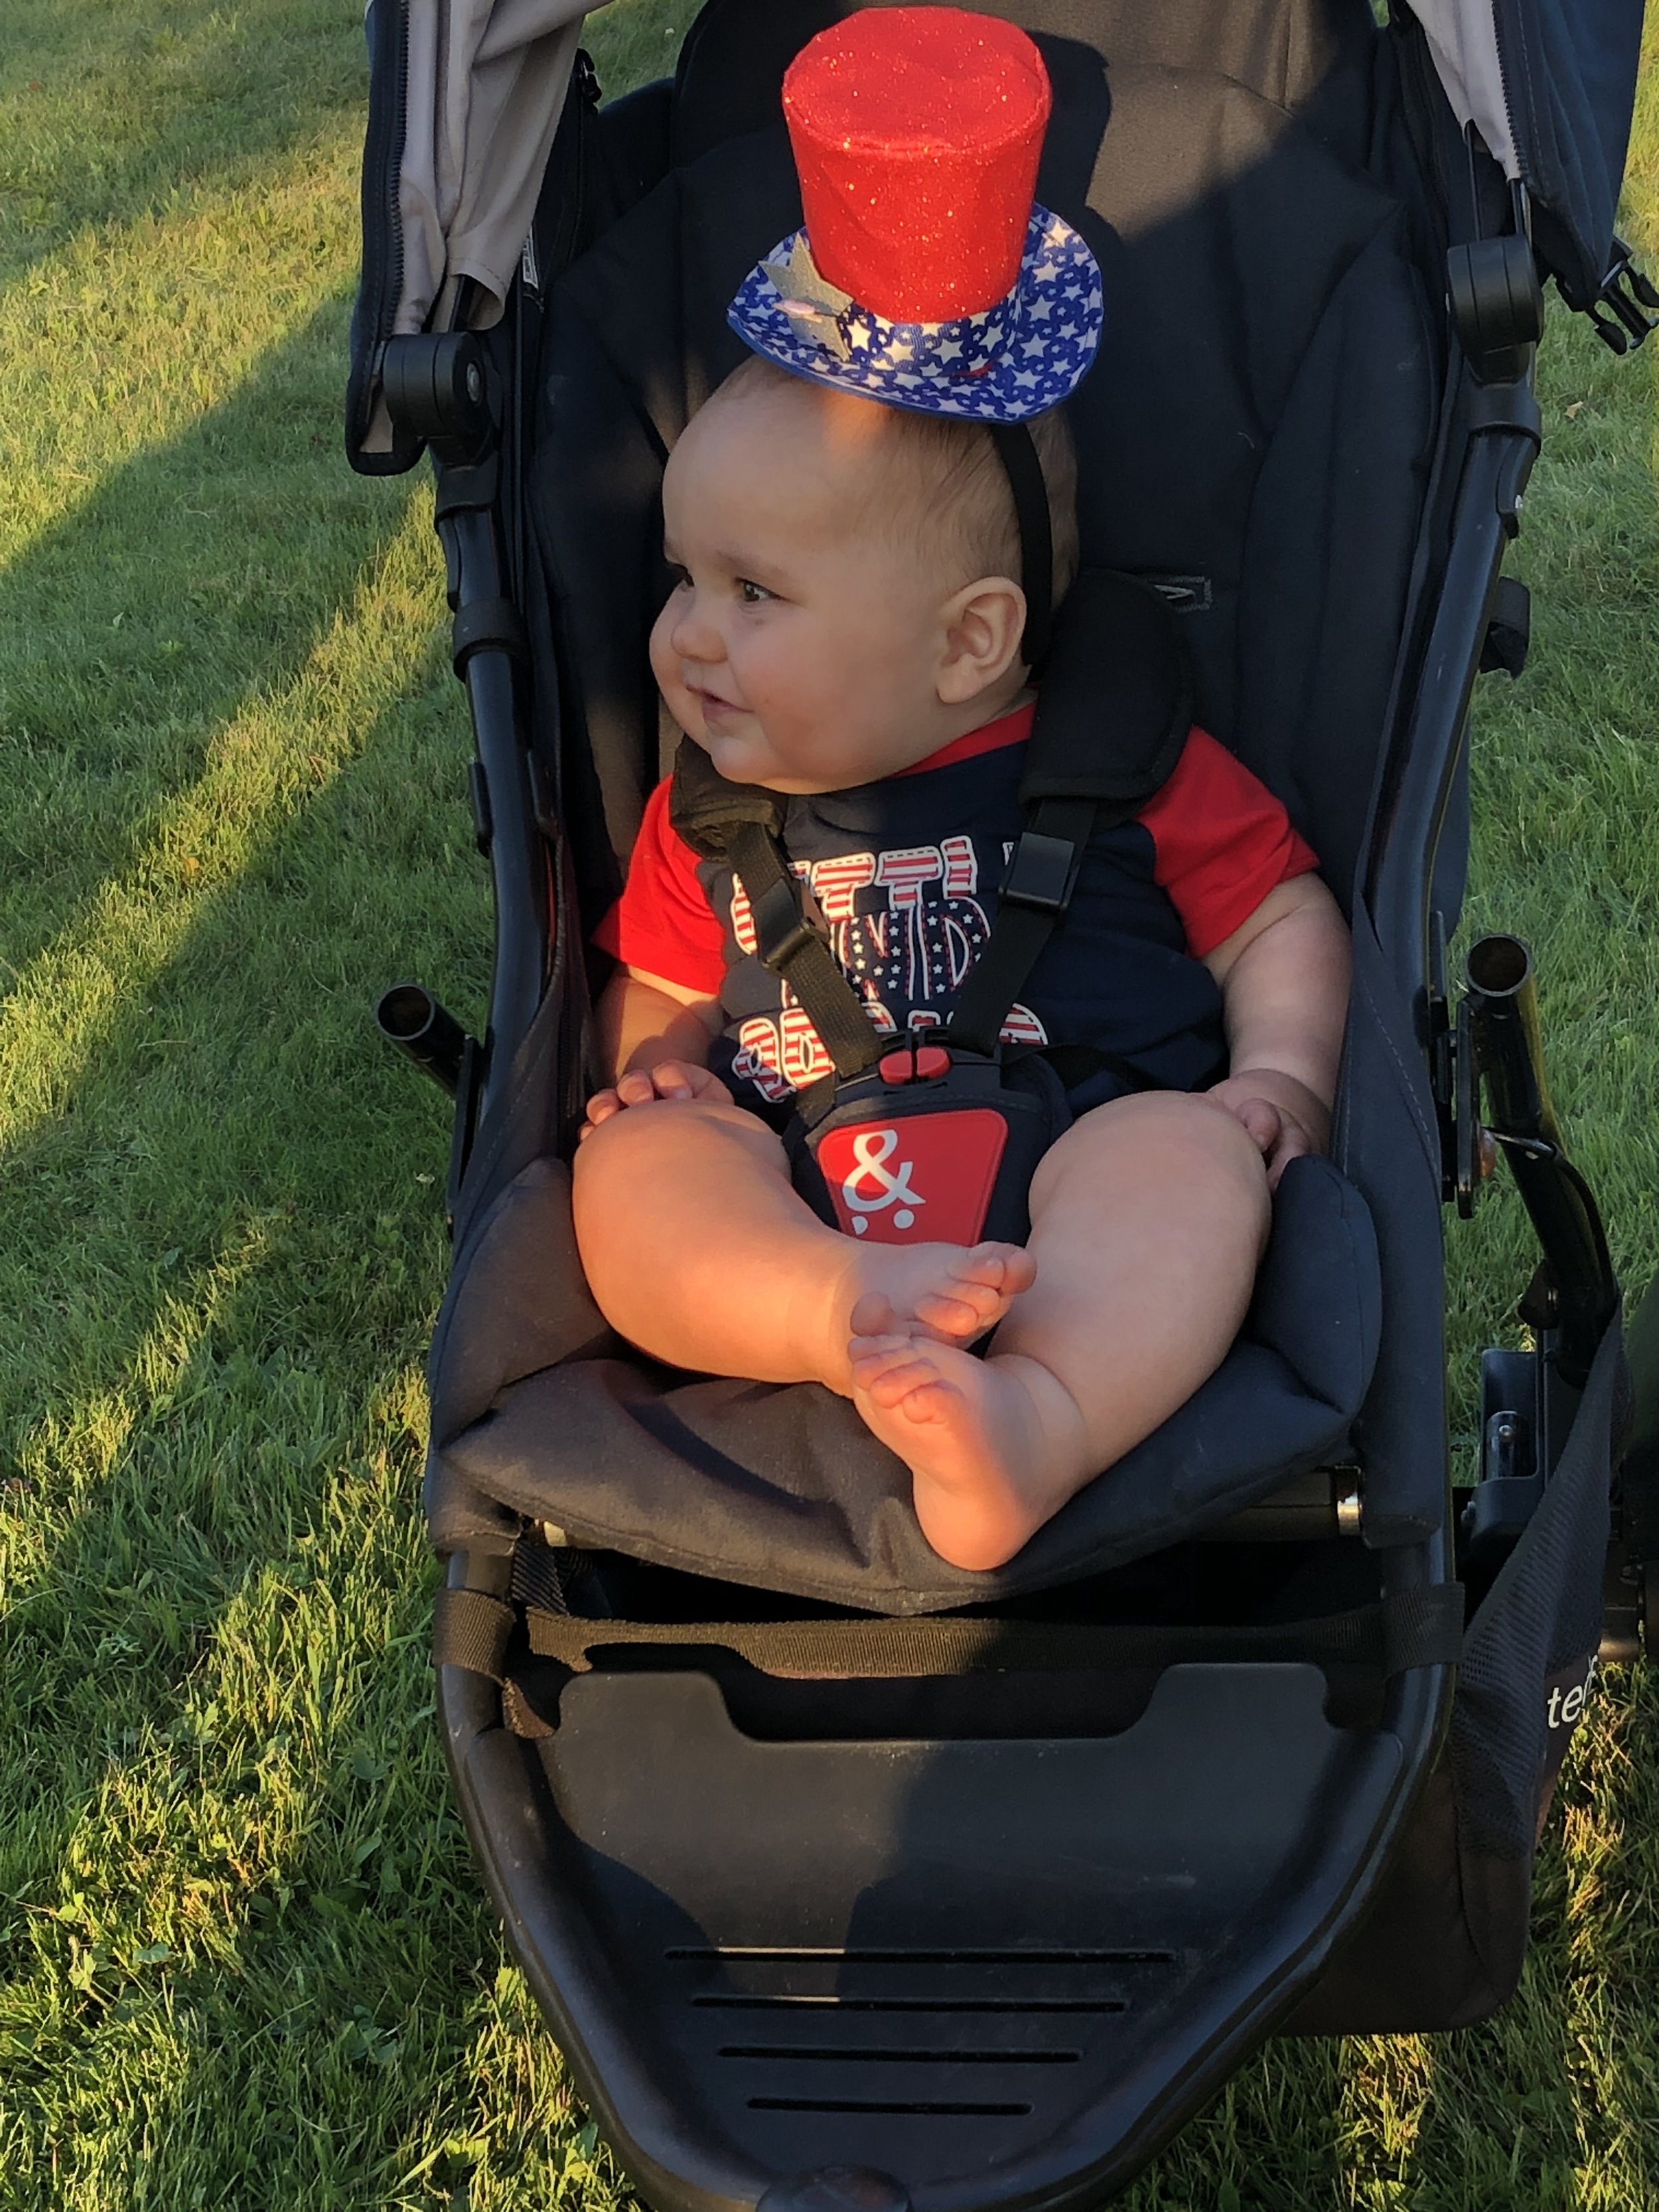   The happiest July Fourth baby to grace the new lawns overlooking the Flanders Park bandshell Wednesday evening was Shannon and Josh Trembley's third boy, Tommy, brother to Frank and Louie. The lad came decked for the occasion. More photos on our we